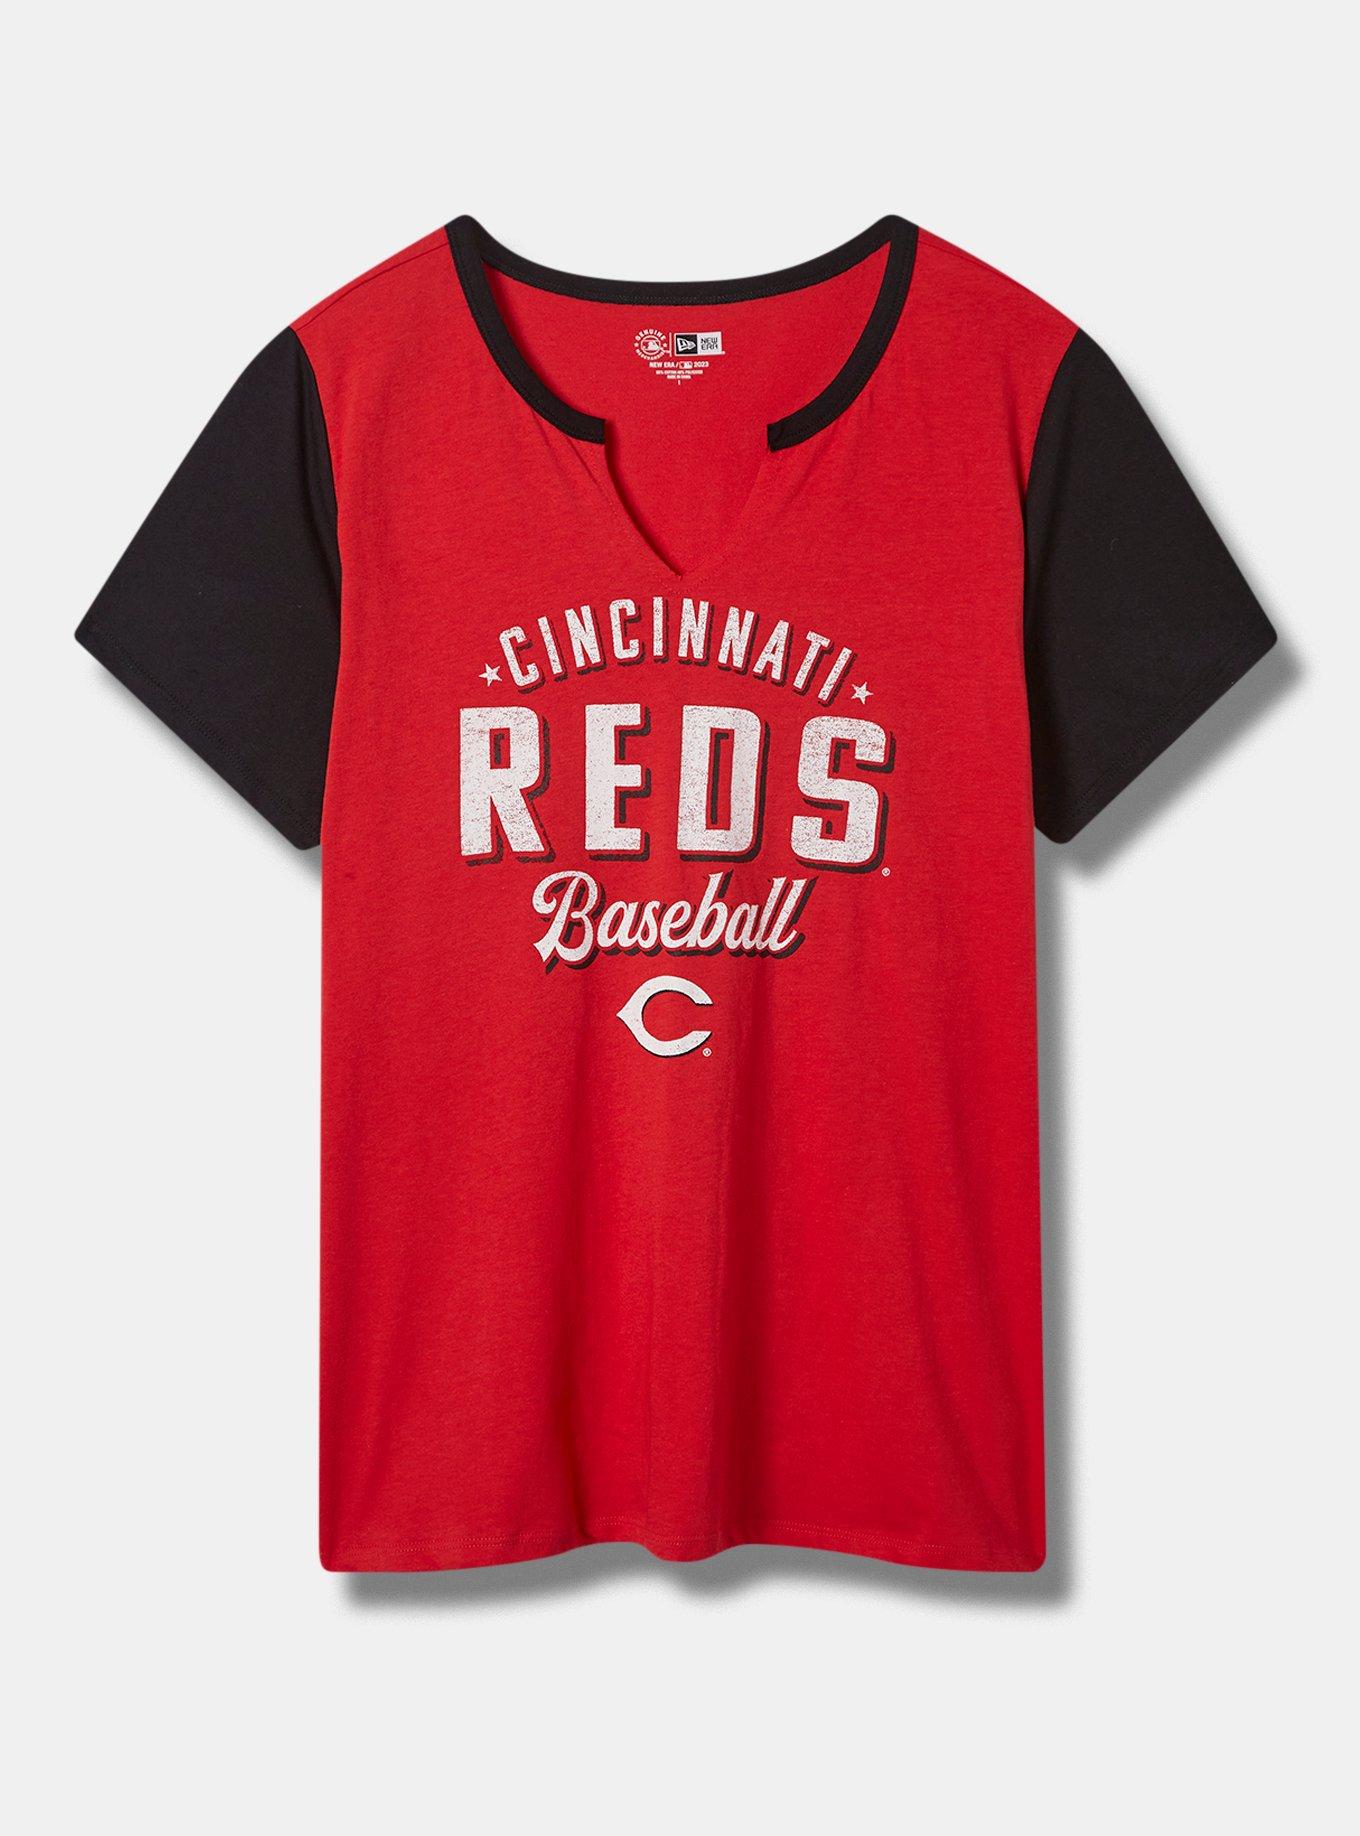 Cincinnati Reds - 1956: The Reds moved to a vest-style uniform